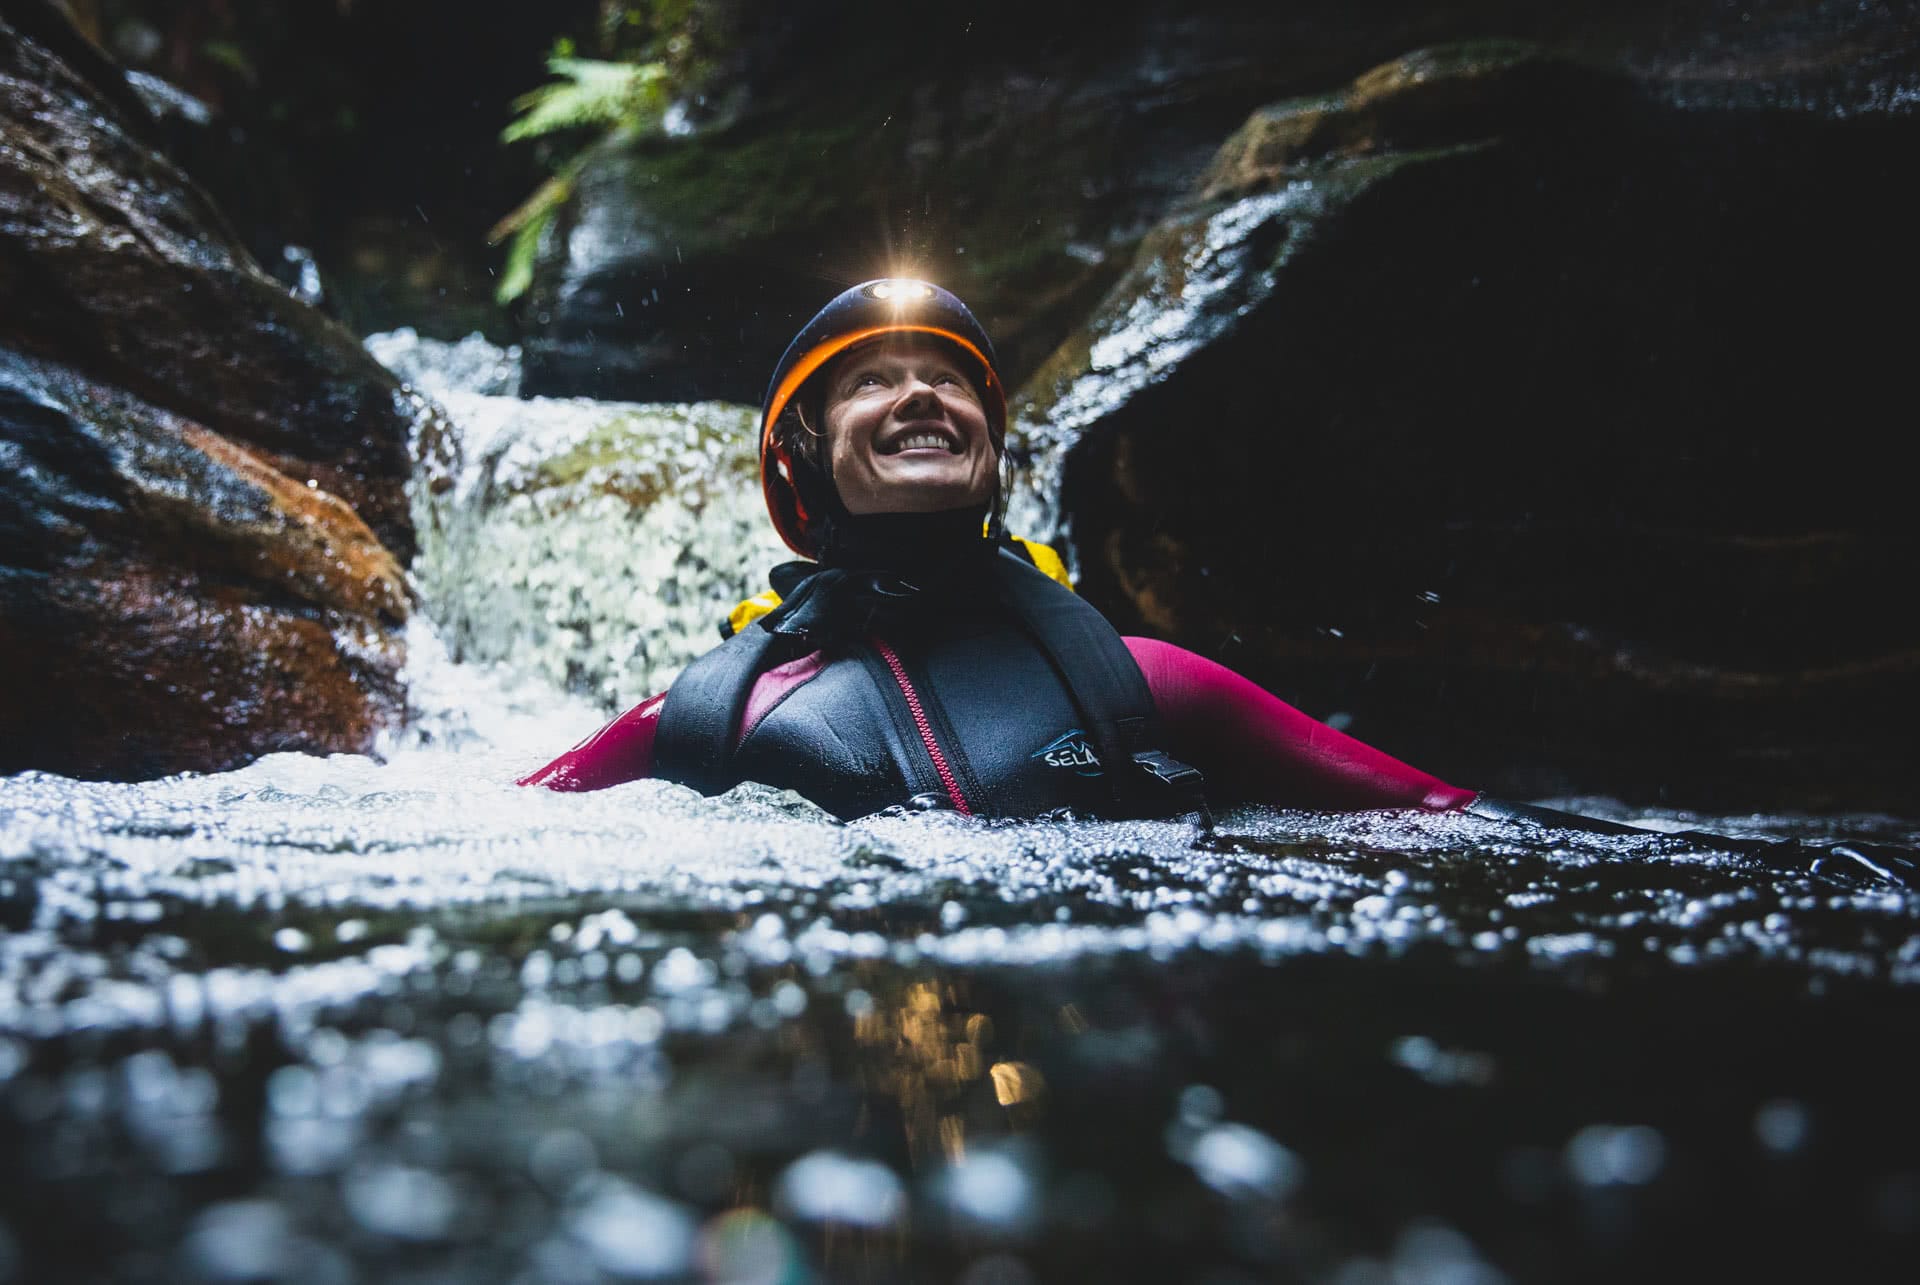 5 Adventures To Make Life Unboring, knog, photo by guy williment, empress canyon, blue mountains, nsw, bilby headlamp, floating